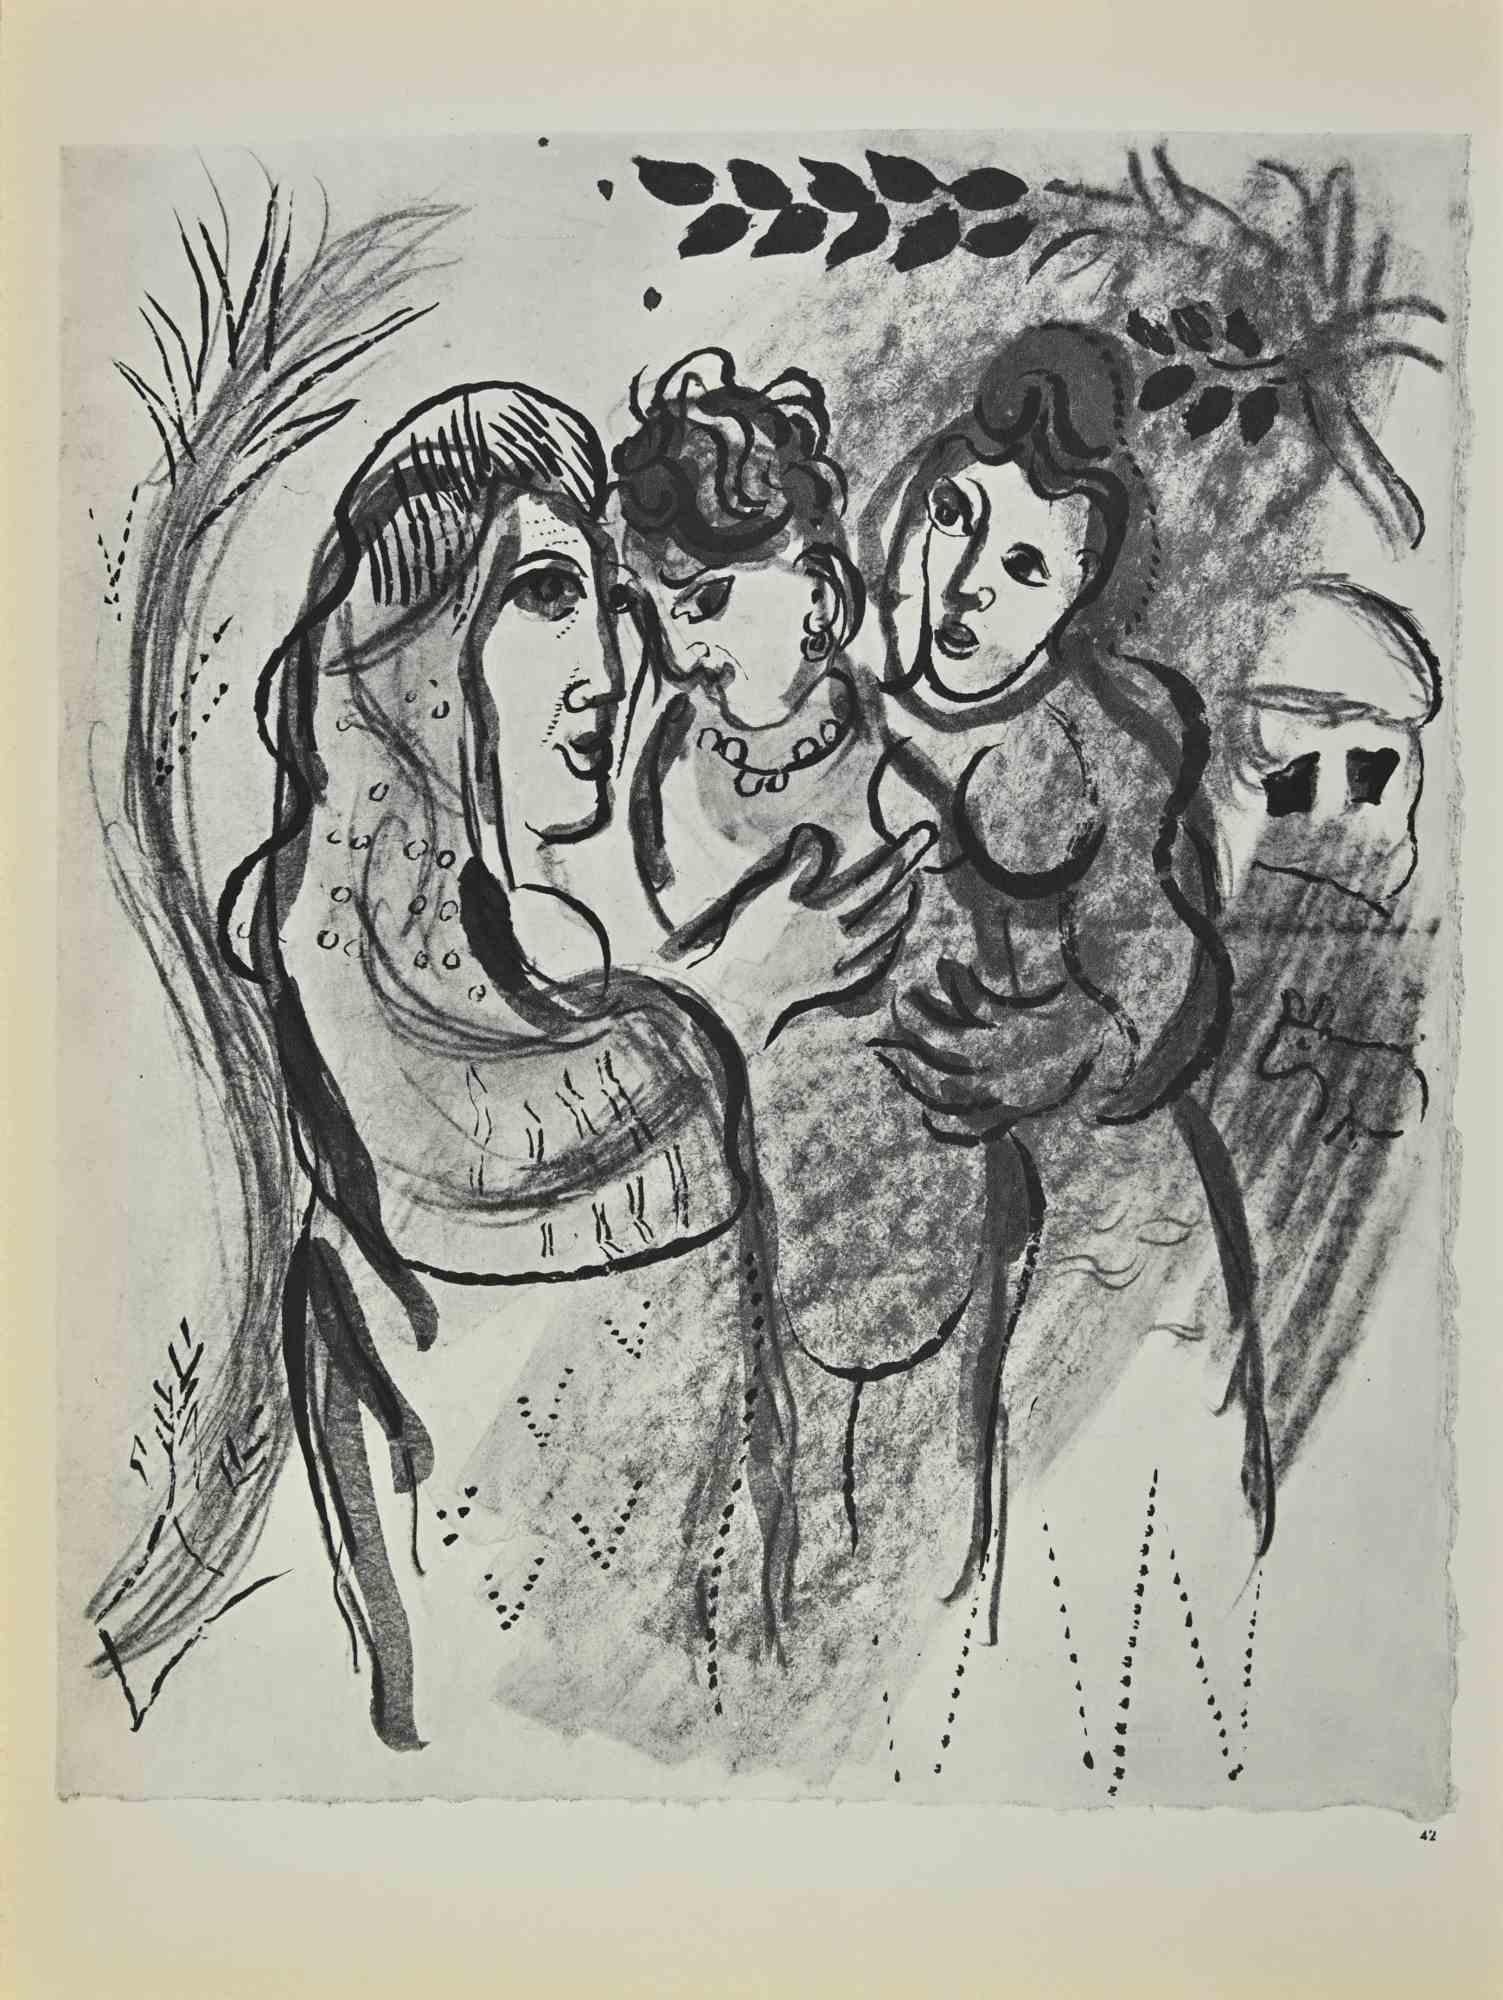 Jephthah's Daughter  is an artwork realized by March Chagall, 1960s.

Lithograph on brown-toned paper, no signature.

Lithograph on both sheets.

Edition of 6500 unsigned lithographs. Printed by Mourlot and published by Tériade, Paris.

Ref.